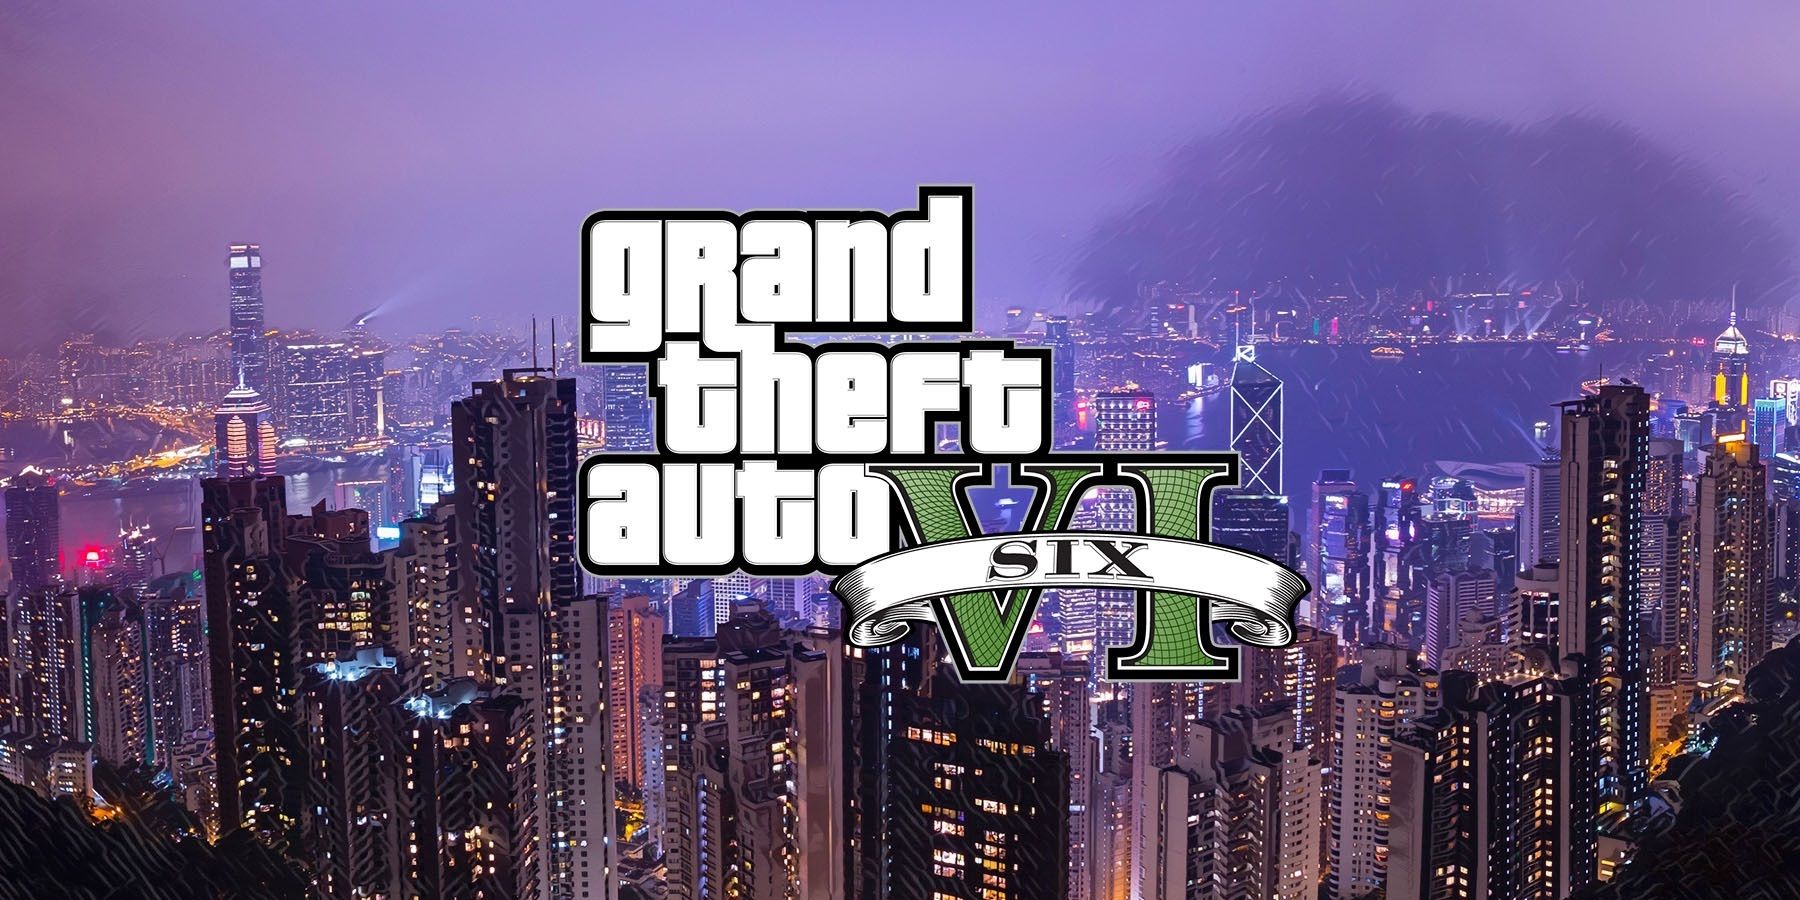 grand theft auto 6 logo with city background